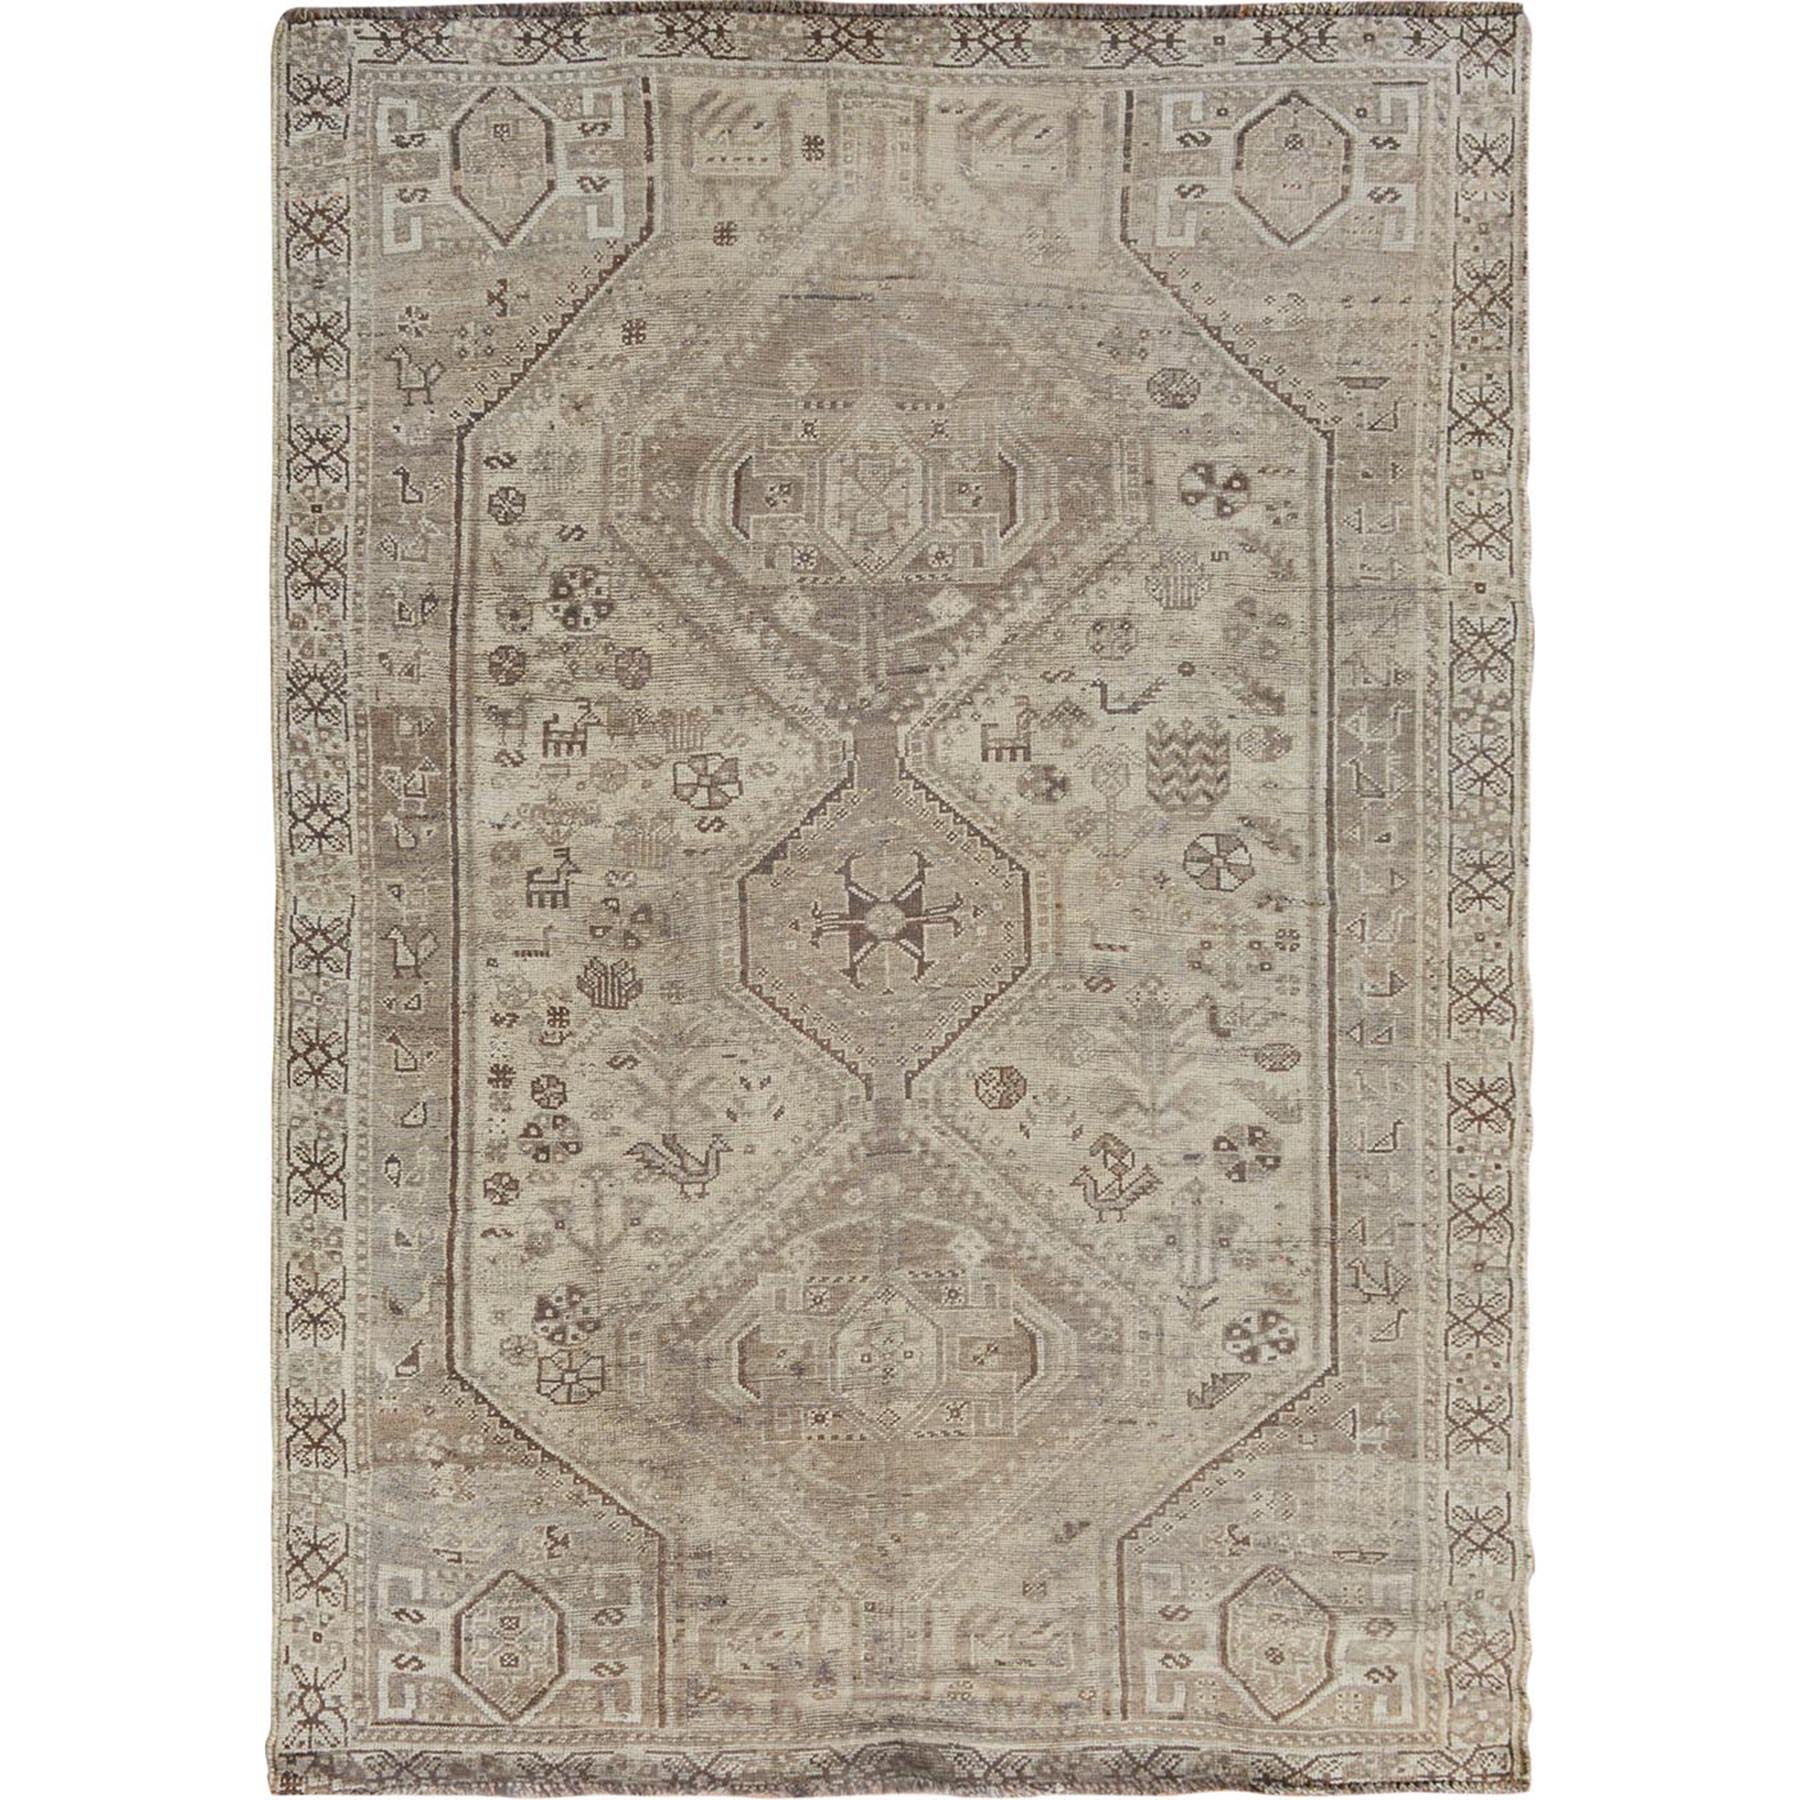 5'8"X8' Natural Colors Vintage And Worn Down Persian Hand Knotted Oriental Rug moae7a0c